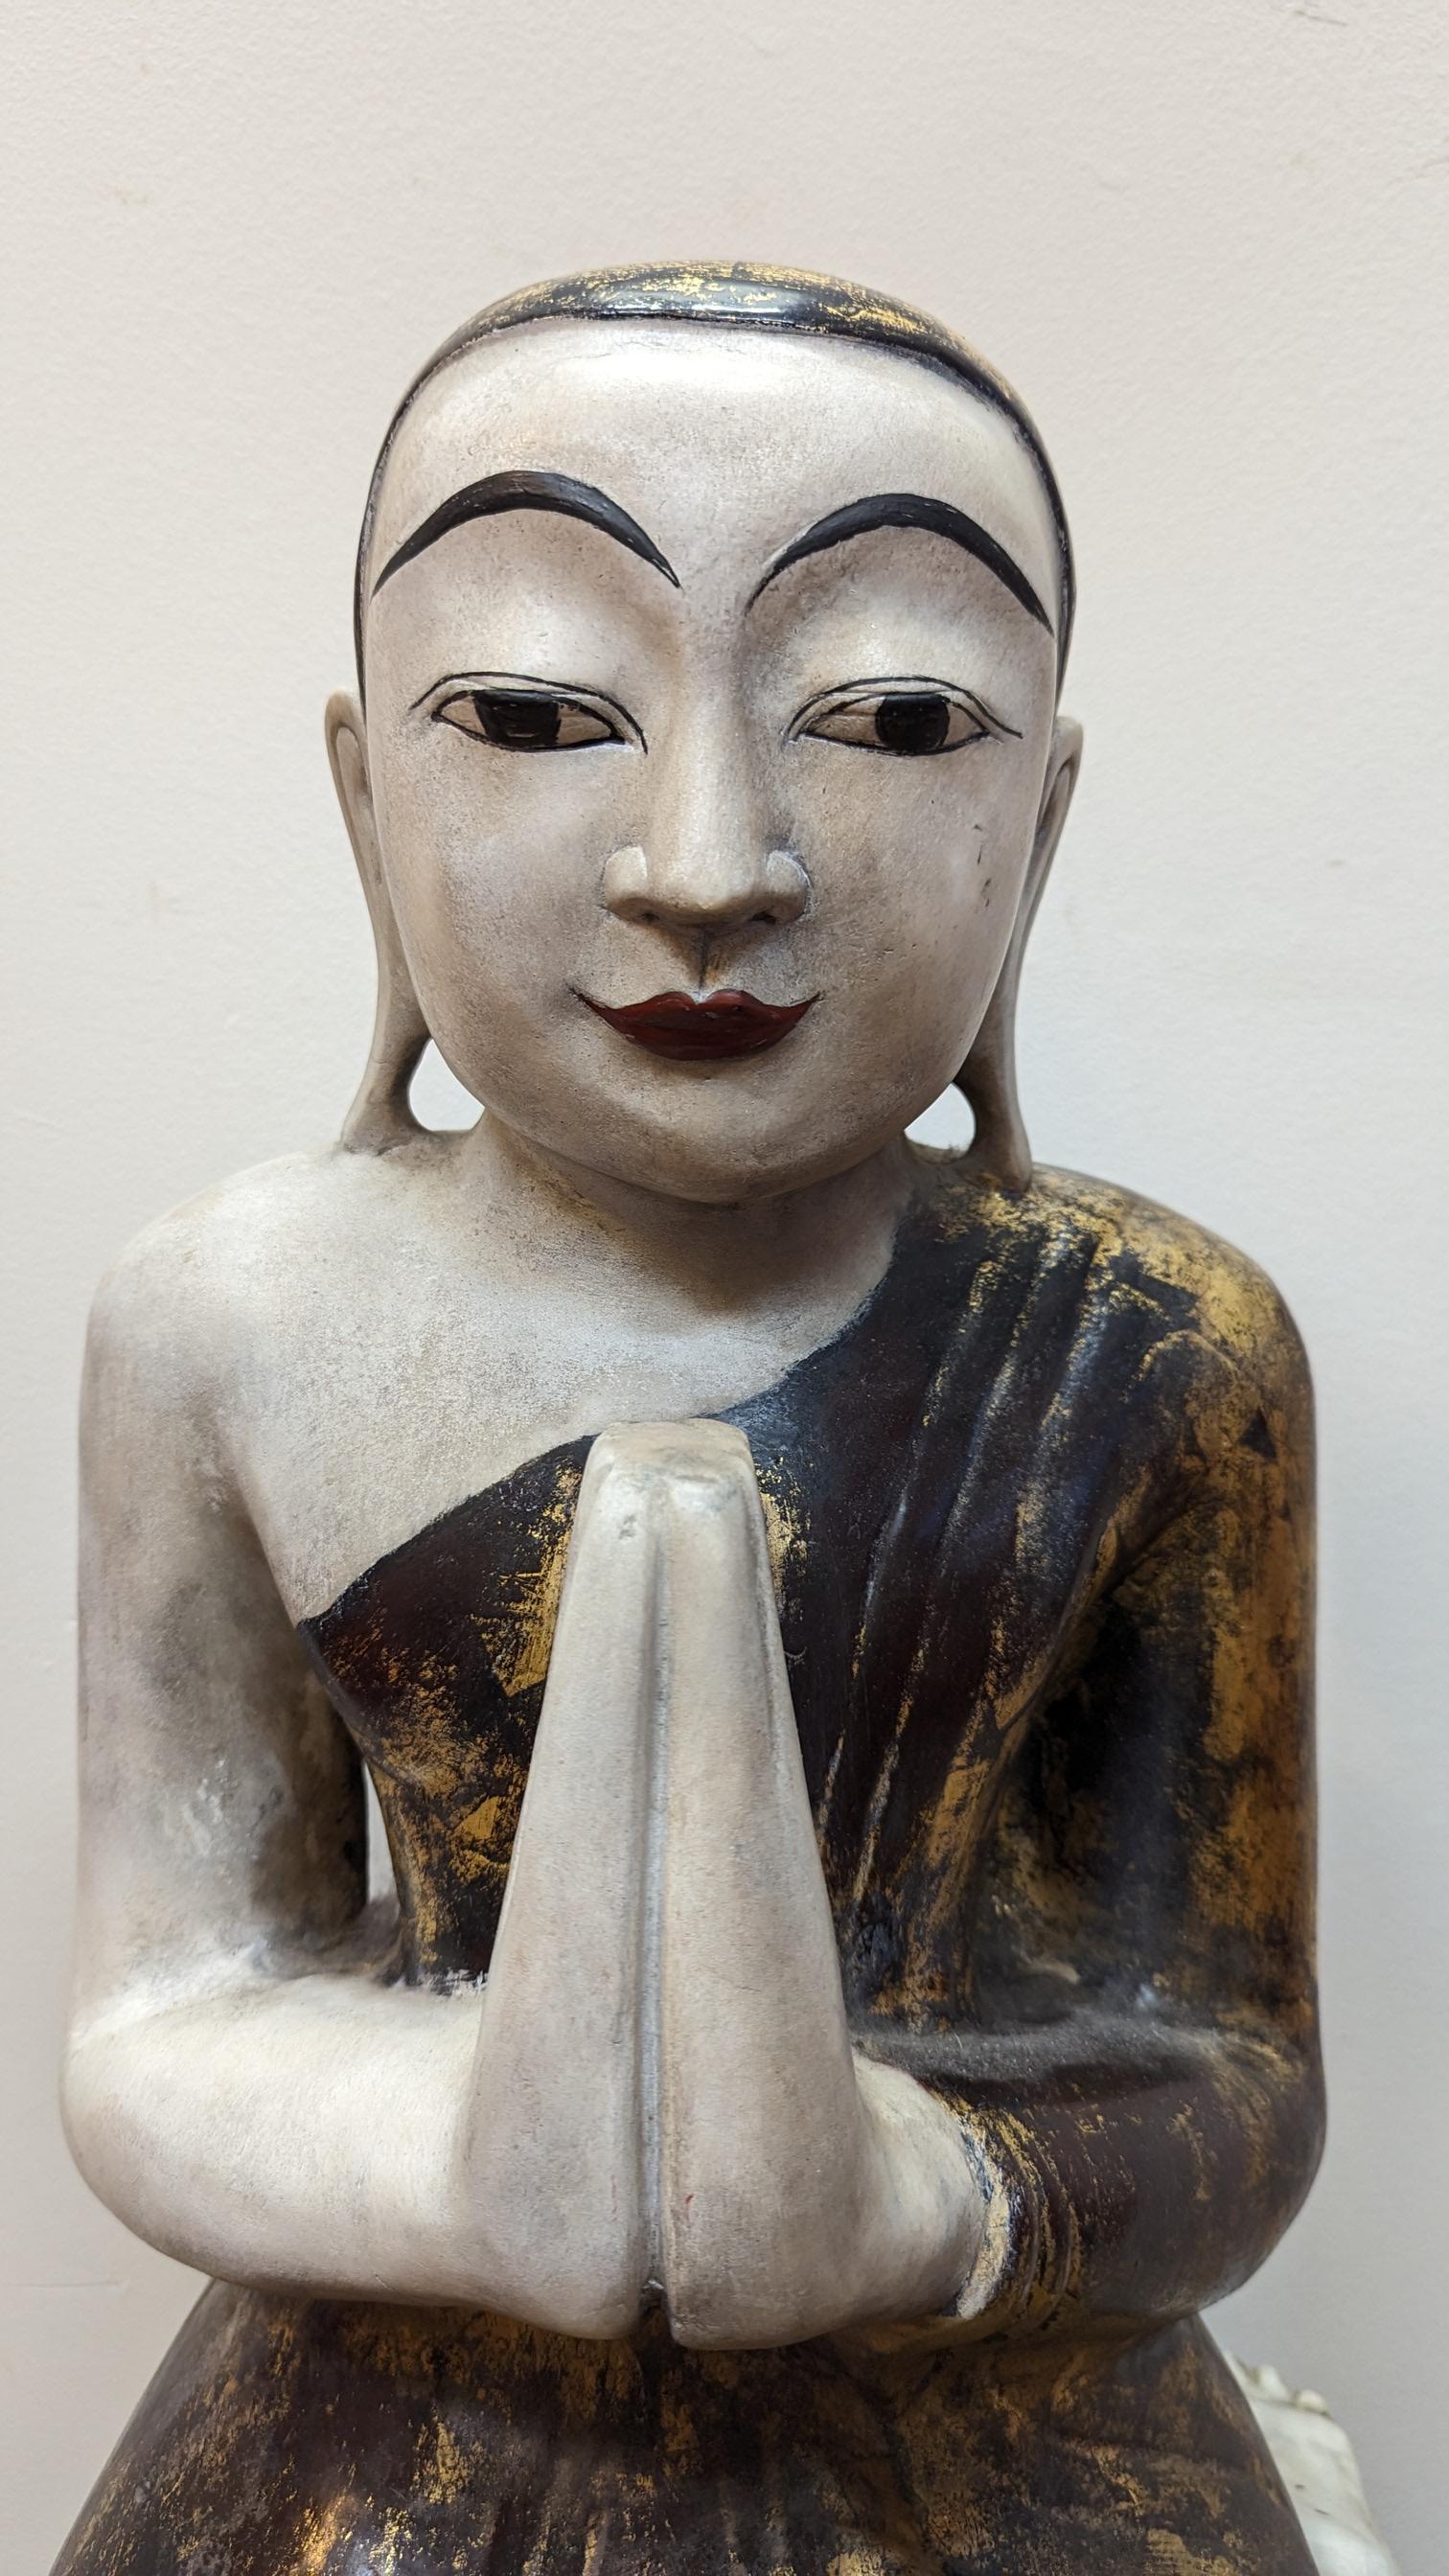 Wonderful Burmese Buddhist Devote carved from a large solid stone of Alabaster.  Collected in Myanmar Kayin State in 2004.  This statue dates to early 20th century being of the Mandalay Period 1853-1948 Burma.  Beautifully rendered Buddhist monk in